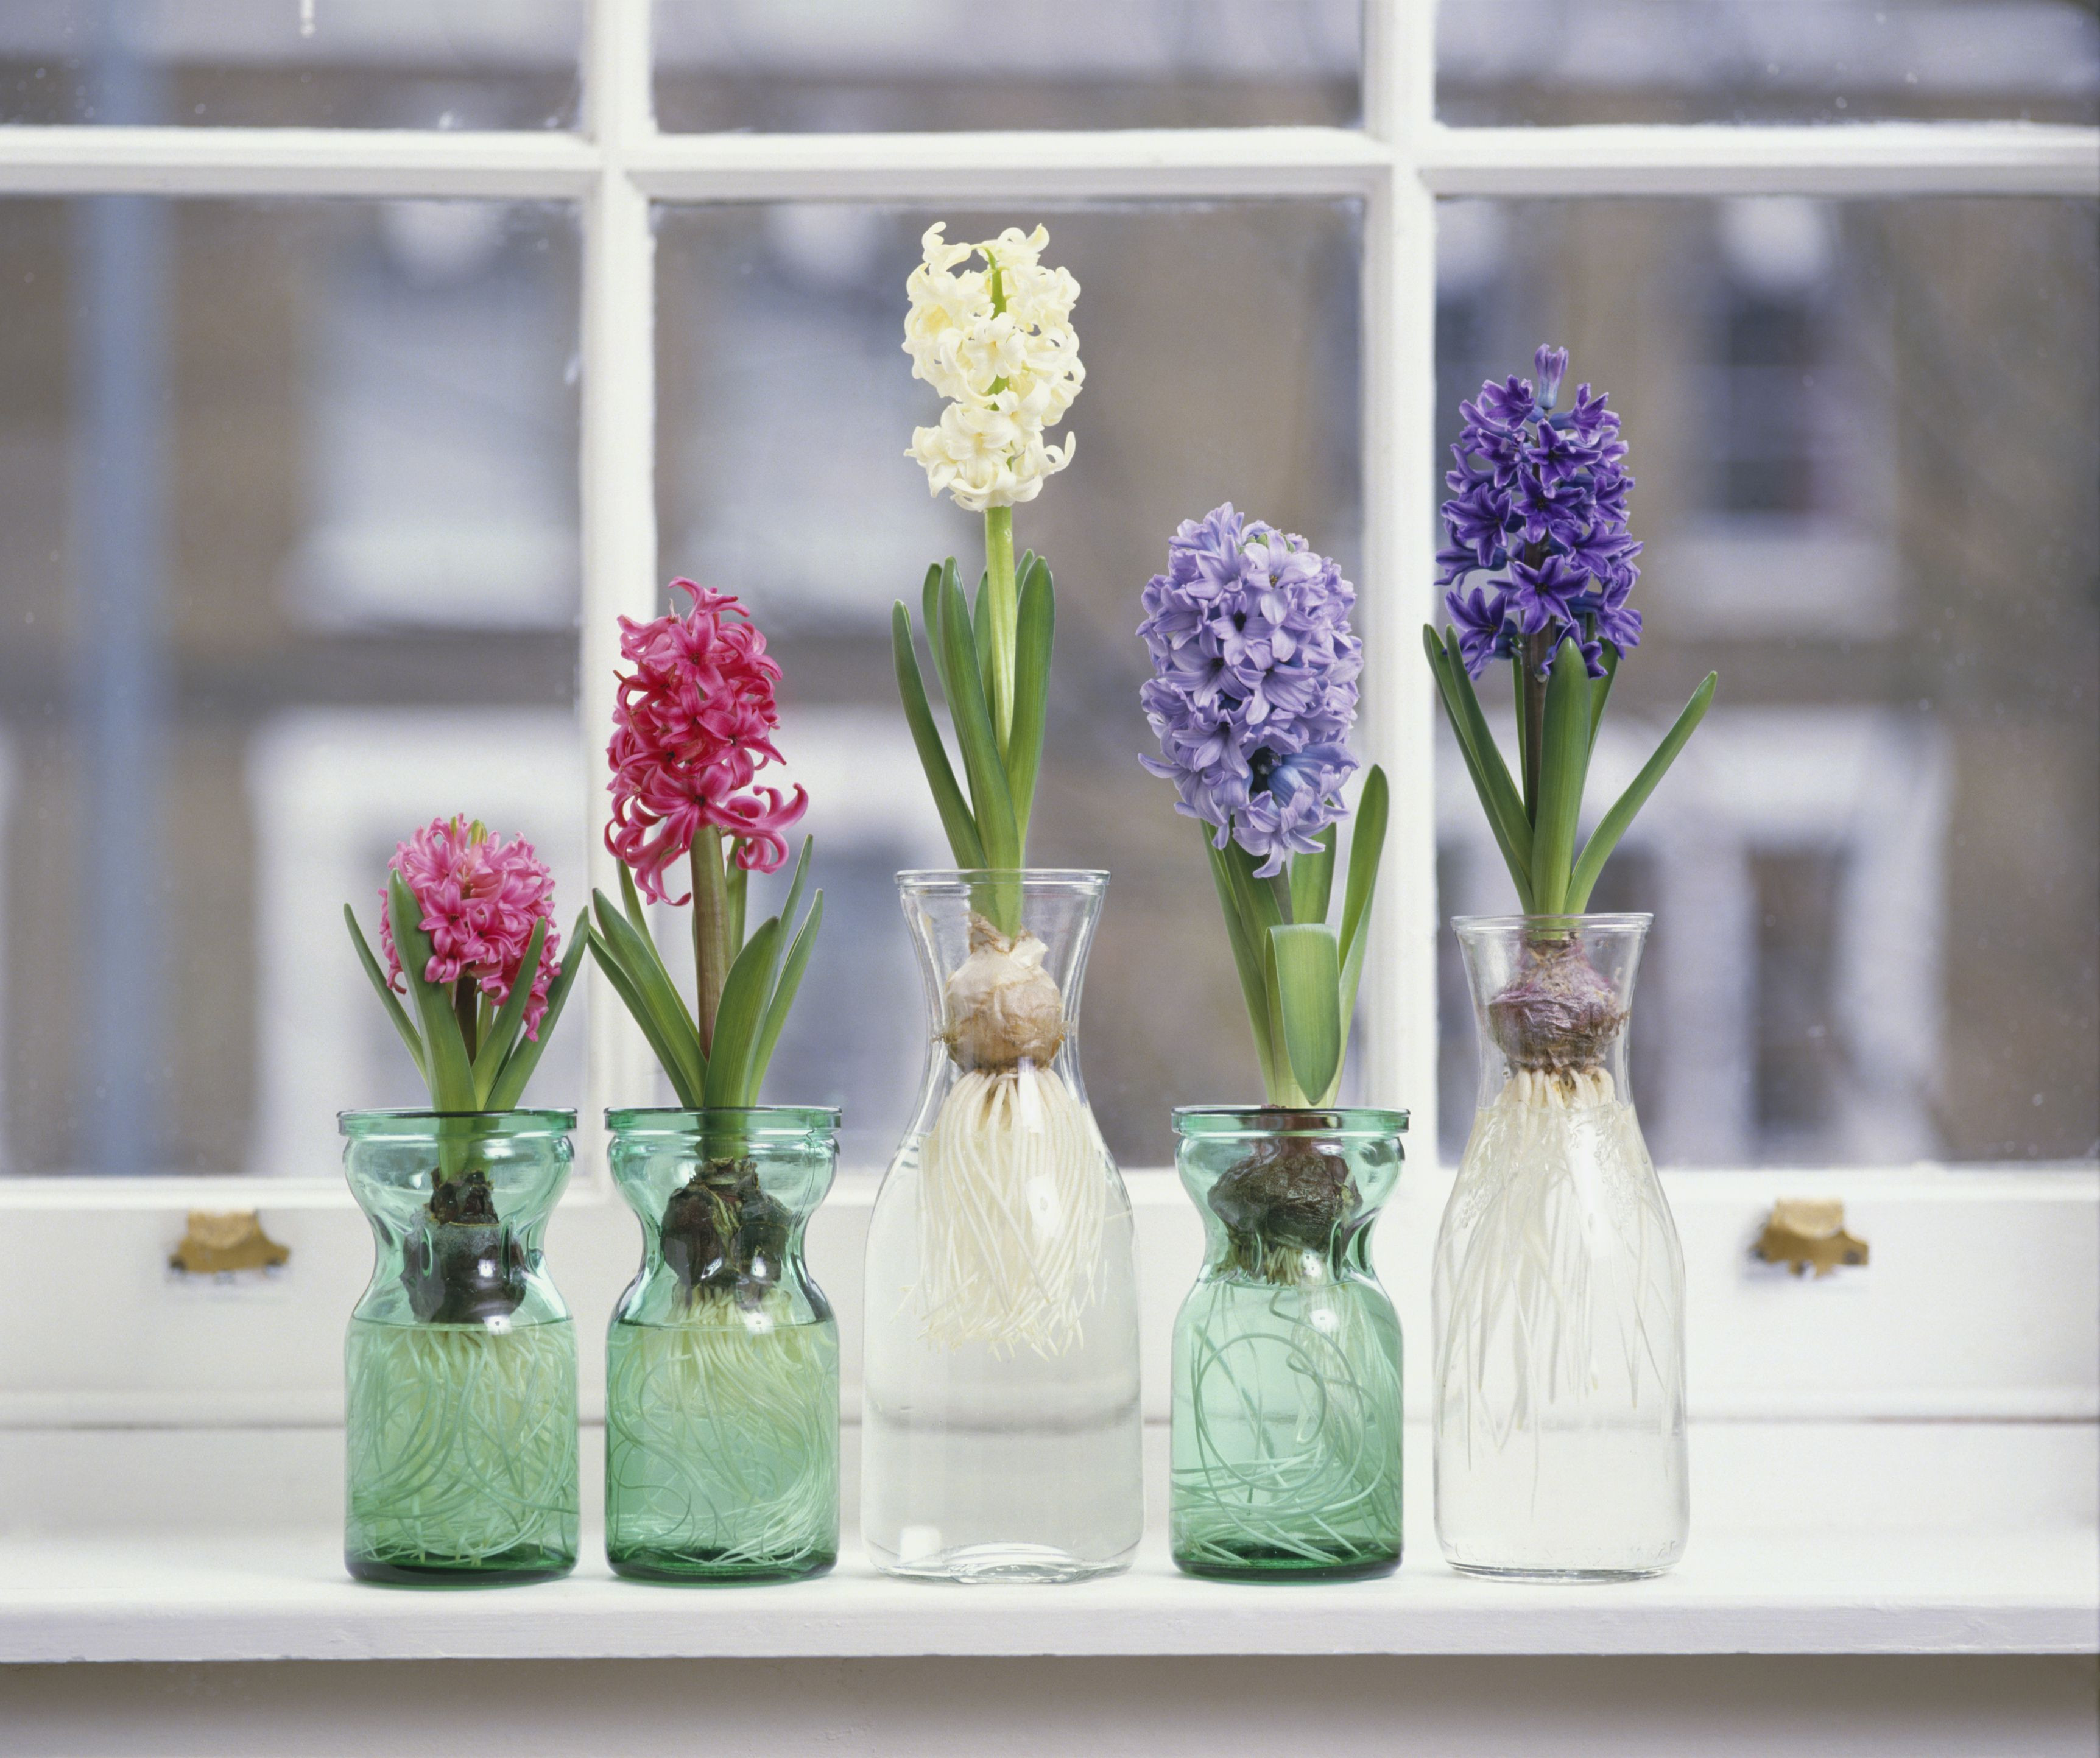 14 Awesome Flowers In Small Glass Vases 2024 free download flowers in small glass vases of how to grow hyacinth flowers indoors for pink white and purple hyacinthus plants with bulbs in glass jars on window sill 125157739 57c5b8f73df78cc16ead76eb